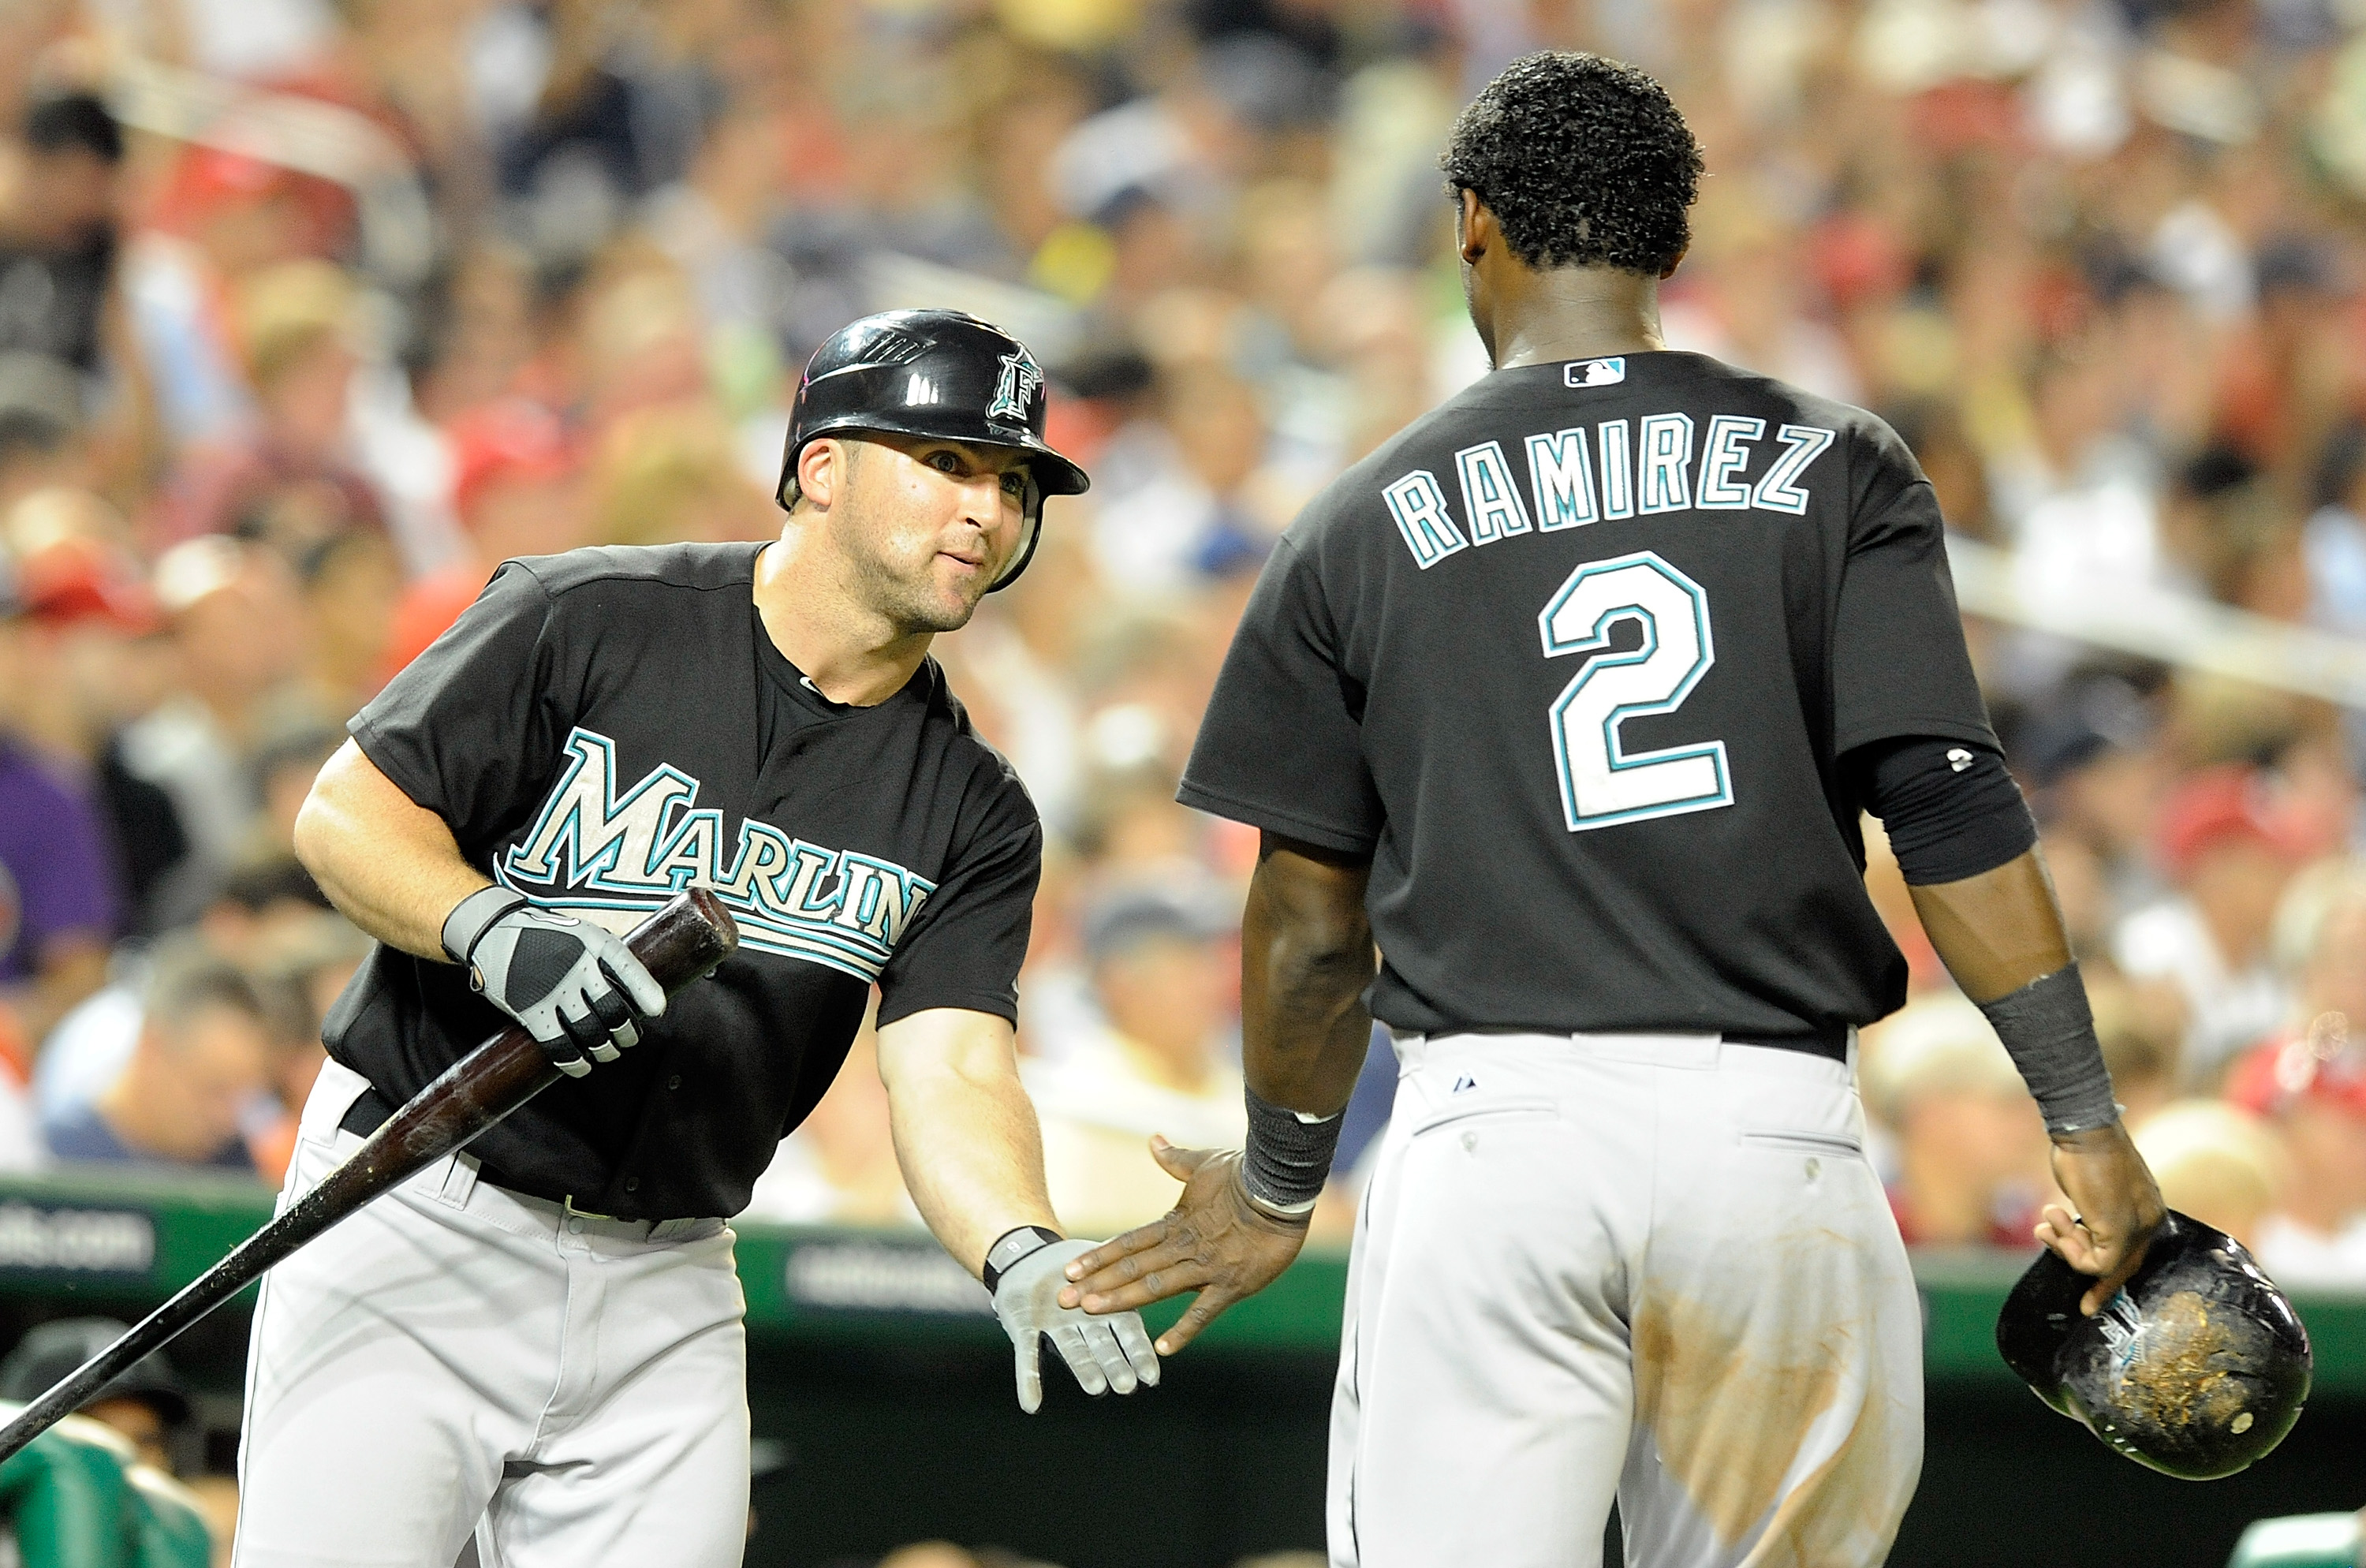 WASHINGTON - AUGUST 10:  Hanley Ramirez #2 of the Florida Marlins is congratulated by Dan Uggla #6 after scoring in the fifth inning against the Washington Nationals at Nationals Park on August 10, 2010 in Washington, DC.  (Photo by Greg Fiume/Getty Image